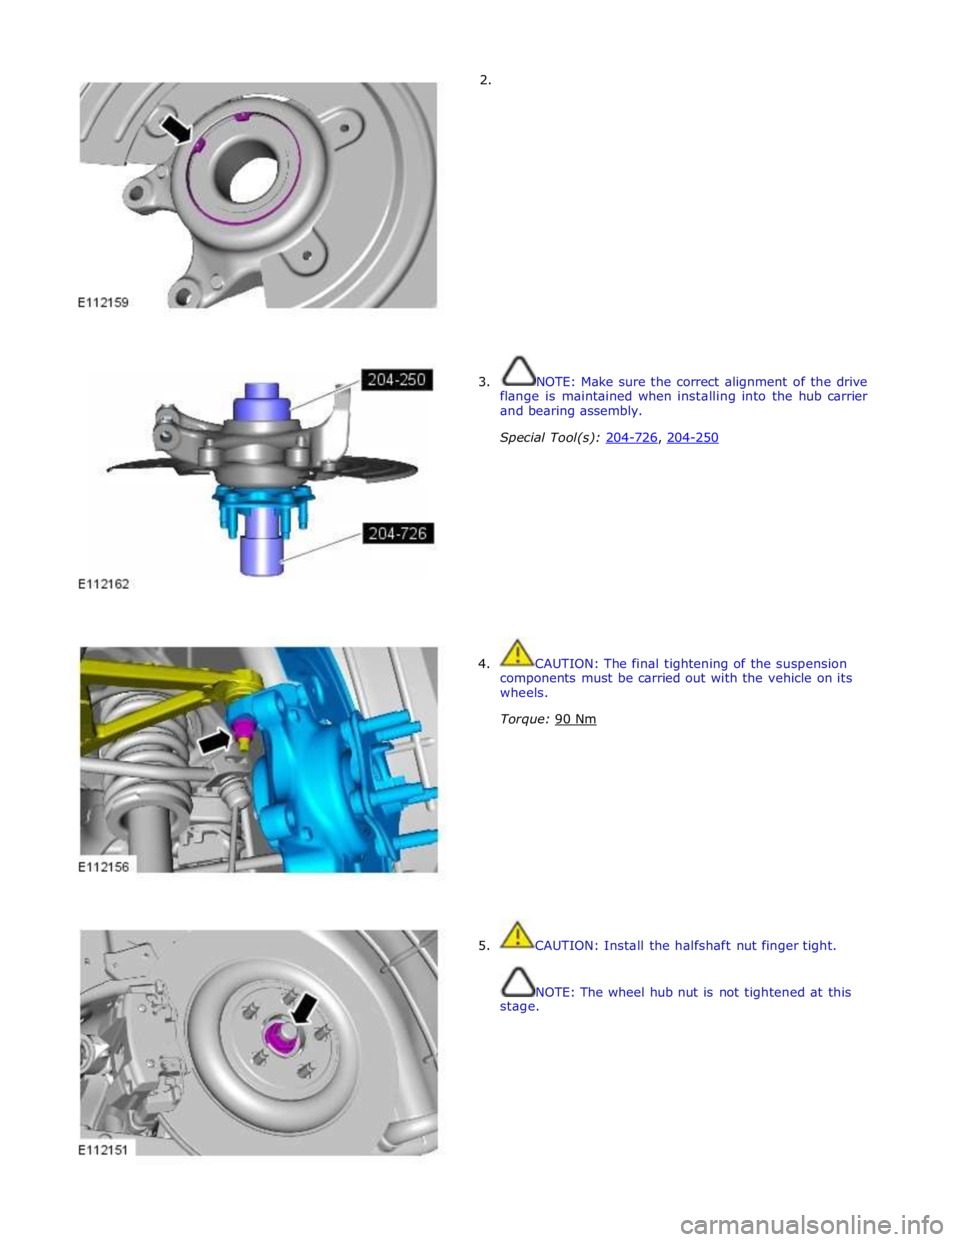 JAGUAR XFR 2010 1.G Workshop Manual         2. 
3.  NOTE: Make sure the correct alignment of the drive 
flange is maintained when installing into the hub carrier 
and bearing assembly. 
 
Special Tool(s): 204-726, 204-250  
 
 
 
 
 
 
